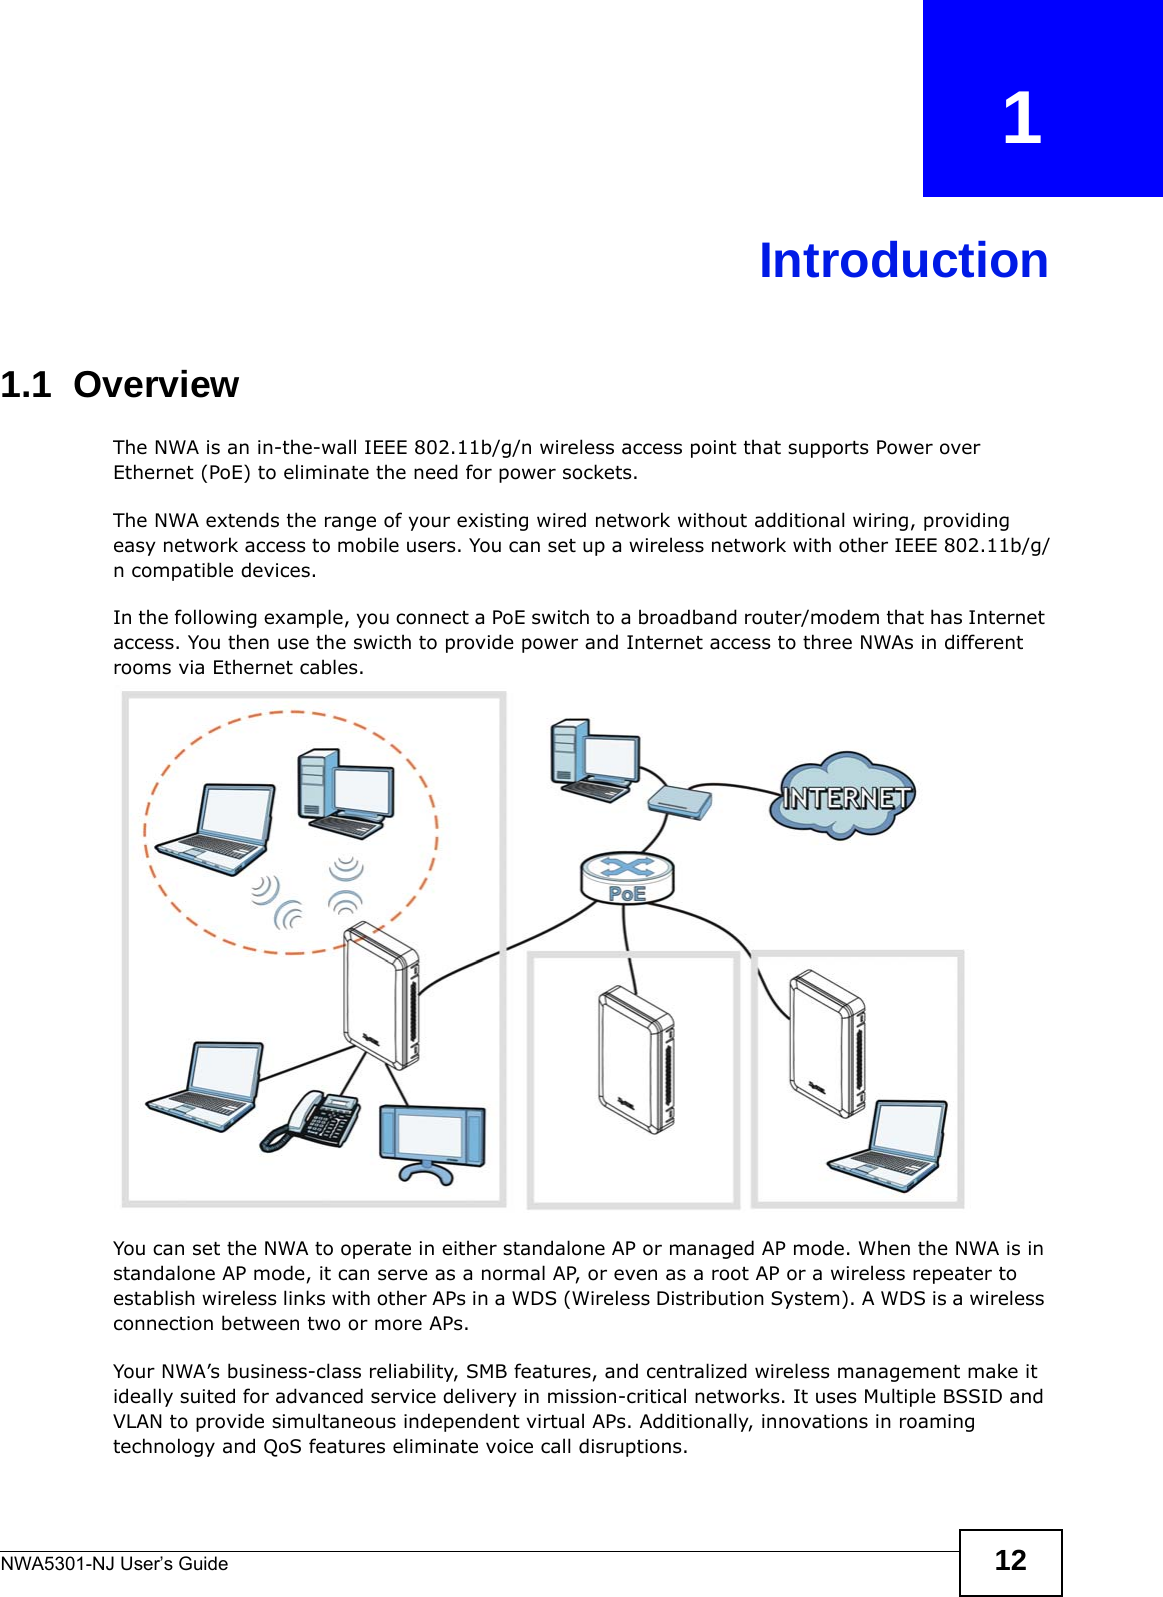 NWA5301-NJ User’s Guide 12CHAPTER   1Introduction1.1  Overview The NWA is an in-the-wall IEEE 802.11b/g/n wireless access point that supports Power over Ethernet (PoE) to eliminate the need for power sockets.The NWA extends the range of your existing wired network without additional wiring, providing easy network access to mobile users. You can set up a wireless network with other IEEE 802.11b/g/n compatible devices.In the following example, you connect a PoE switch to a broadband router/modem that has Internet access. You then use the swicth to provide power and Internet access to three NWAs in different rooms via Ethernet cables.You can set the NWA to operate in either standalone AP or managed AP mode. When the NWA is in standalone AP mode, it can serve as a normal AP, or even as a root AP or a wireless repeater to establish wireless links with other APs in a WDS (Wireless Distribution System). A WDS is a wireless connection between two or more APs.Your NWA’s business-class reliability, SMB features, and centralized wireless management make it ideally suited for advanced service delivery in mission-critical networks. It uses Multiple BSSID and VLAN to provide simultaneous independent virtual APs. Additionally, innovations in roaming technology and QoS features eliminate voice call disruptions. 